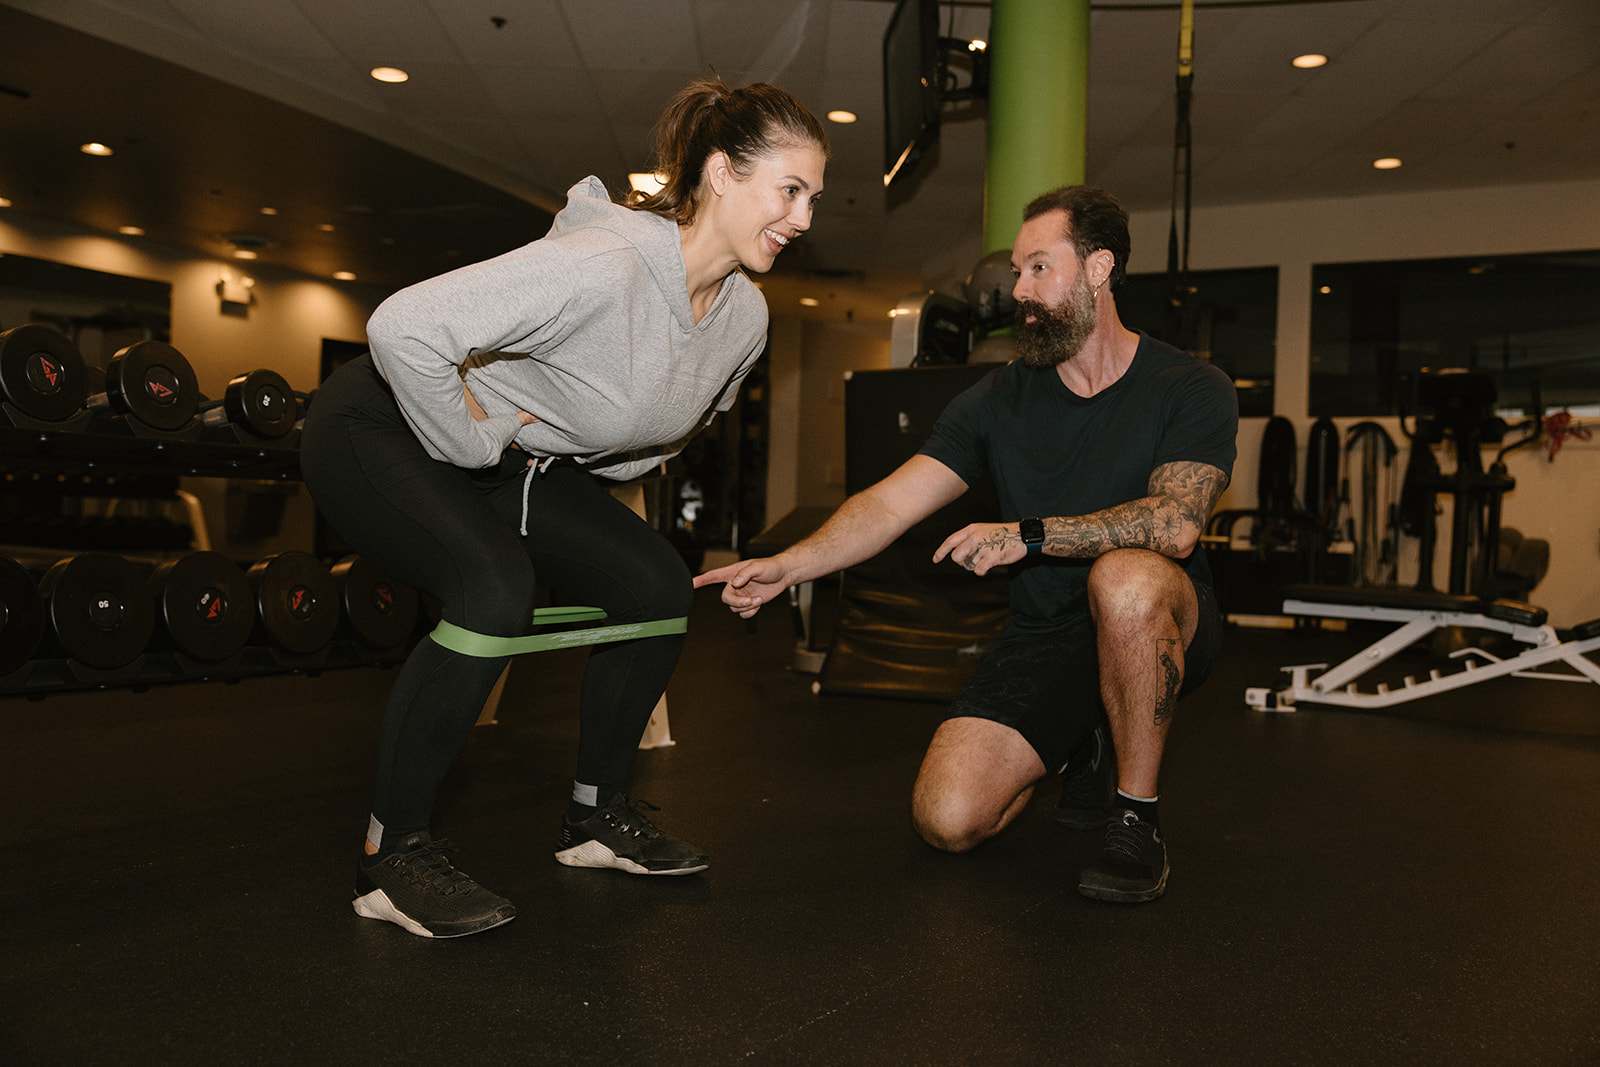 A group fitness class led by a certified personal trainer in Vancouver